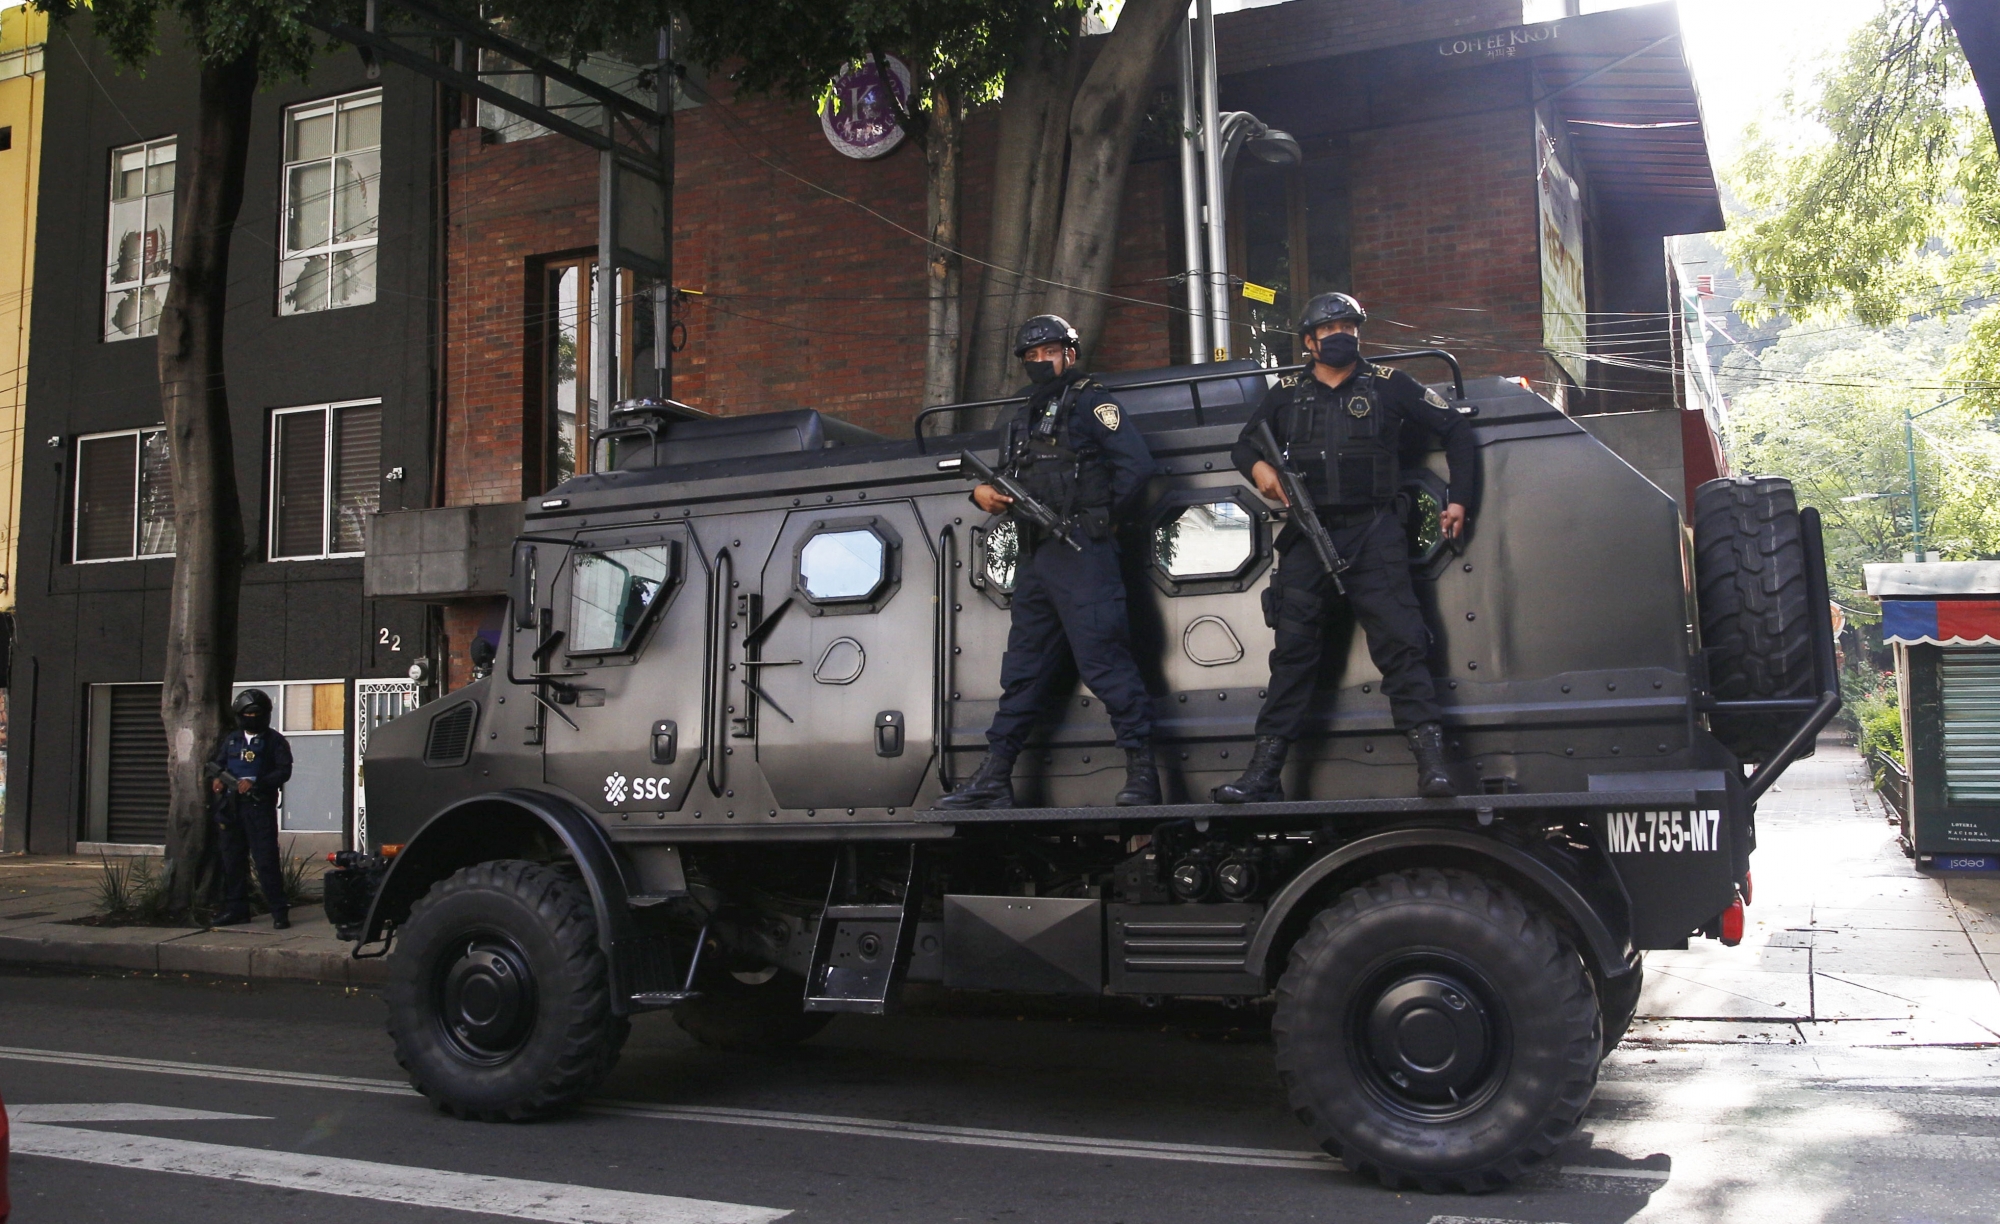 A police vehicle arrives to the place where an abandoned vehicle that is believed to have been used by gunmen in an attack against the chief of police was found, in Mexico City, Friday, June 26, 2020. Heavily armed gunmen attacked and wounded Omar Garcia Harfuch in a brazen operation that left an unspecified number of dead, Mayor Claudia Sheinbaum said Friday. (AP Photo/Marco Ugarte)
ArcInfo